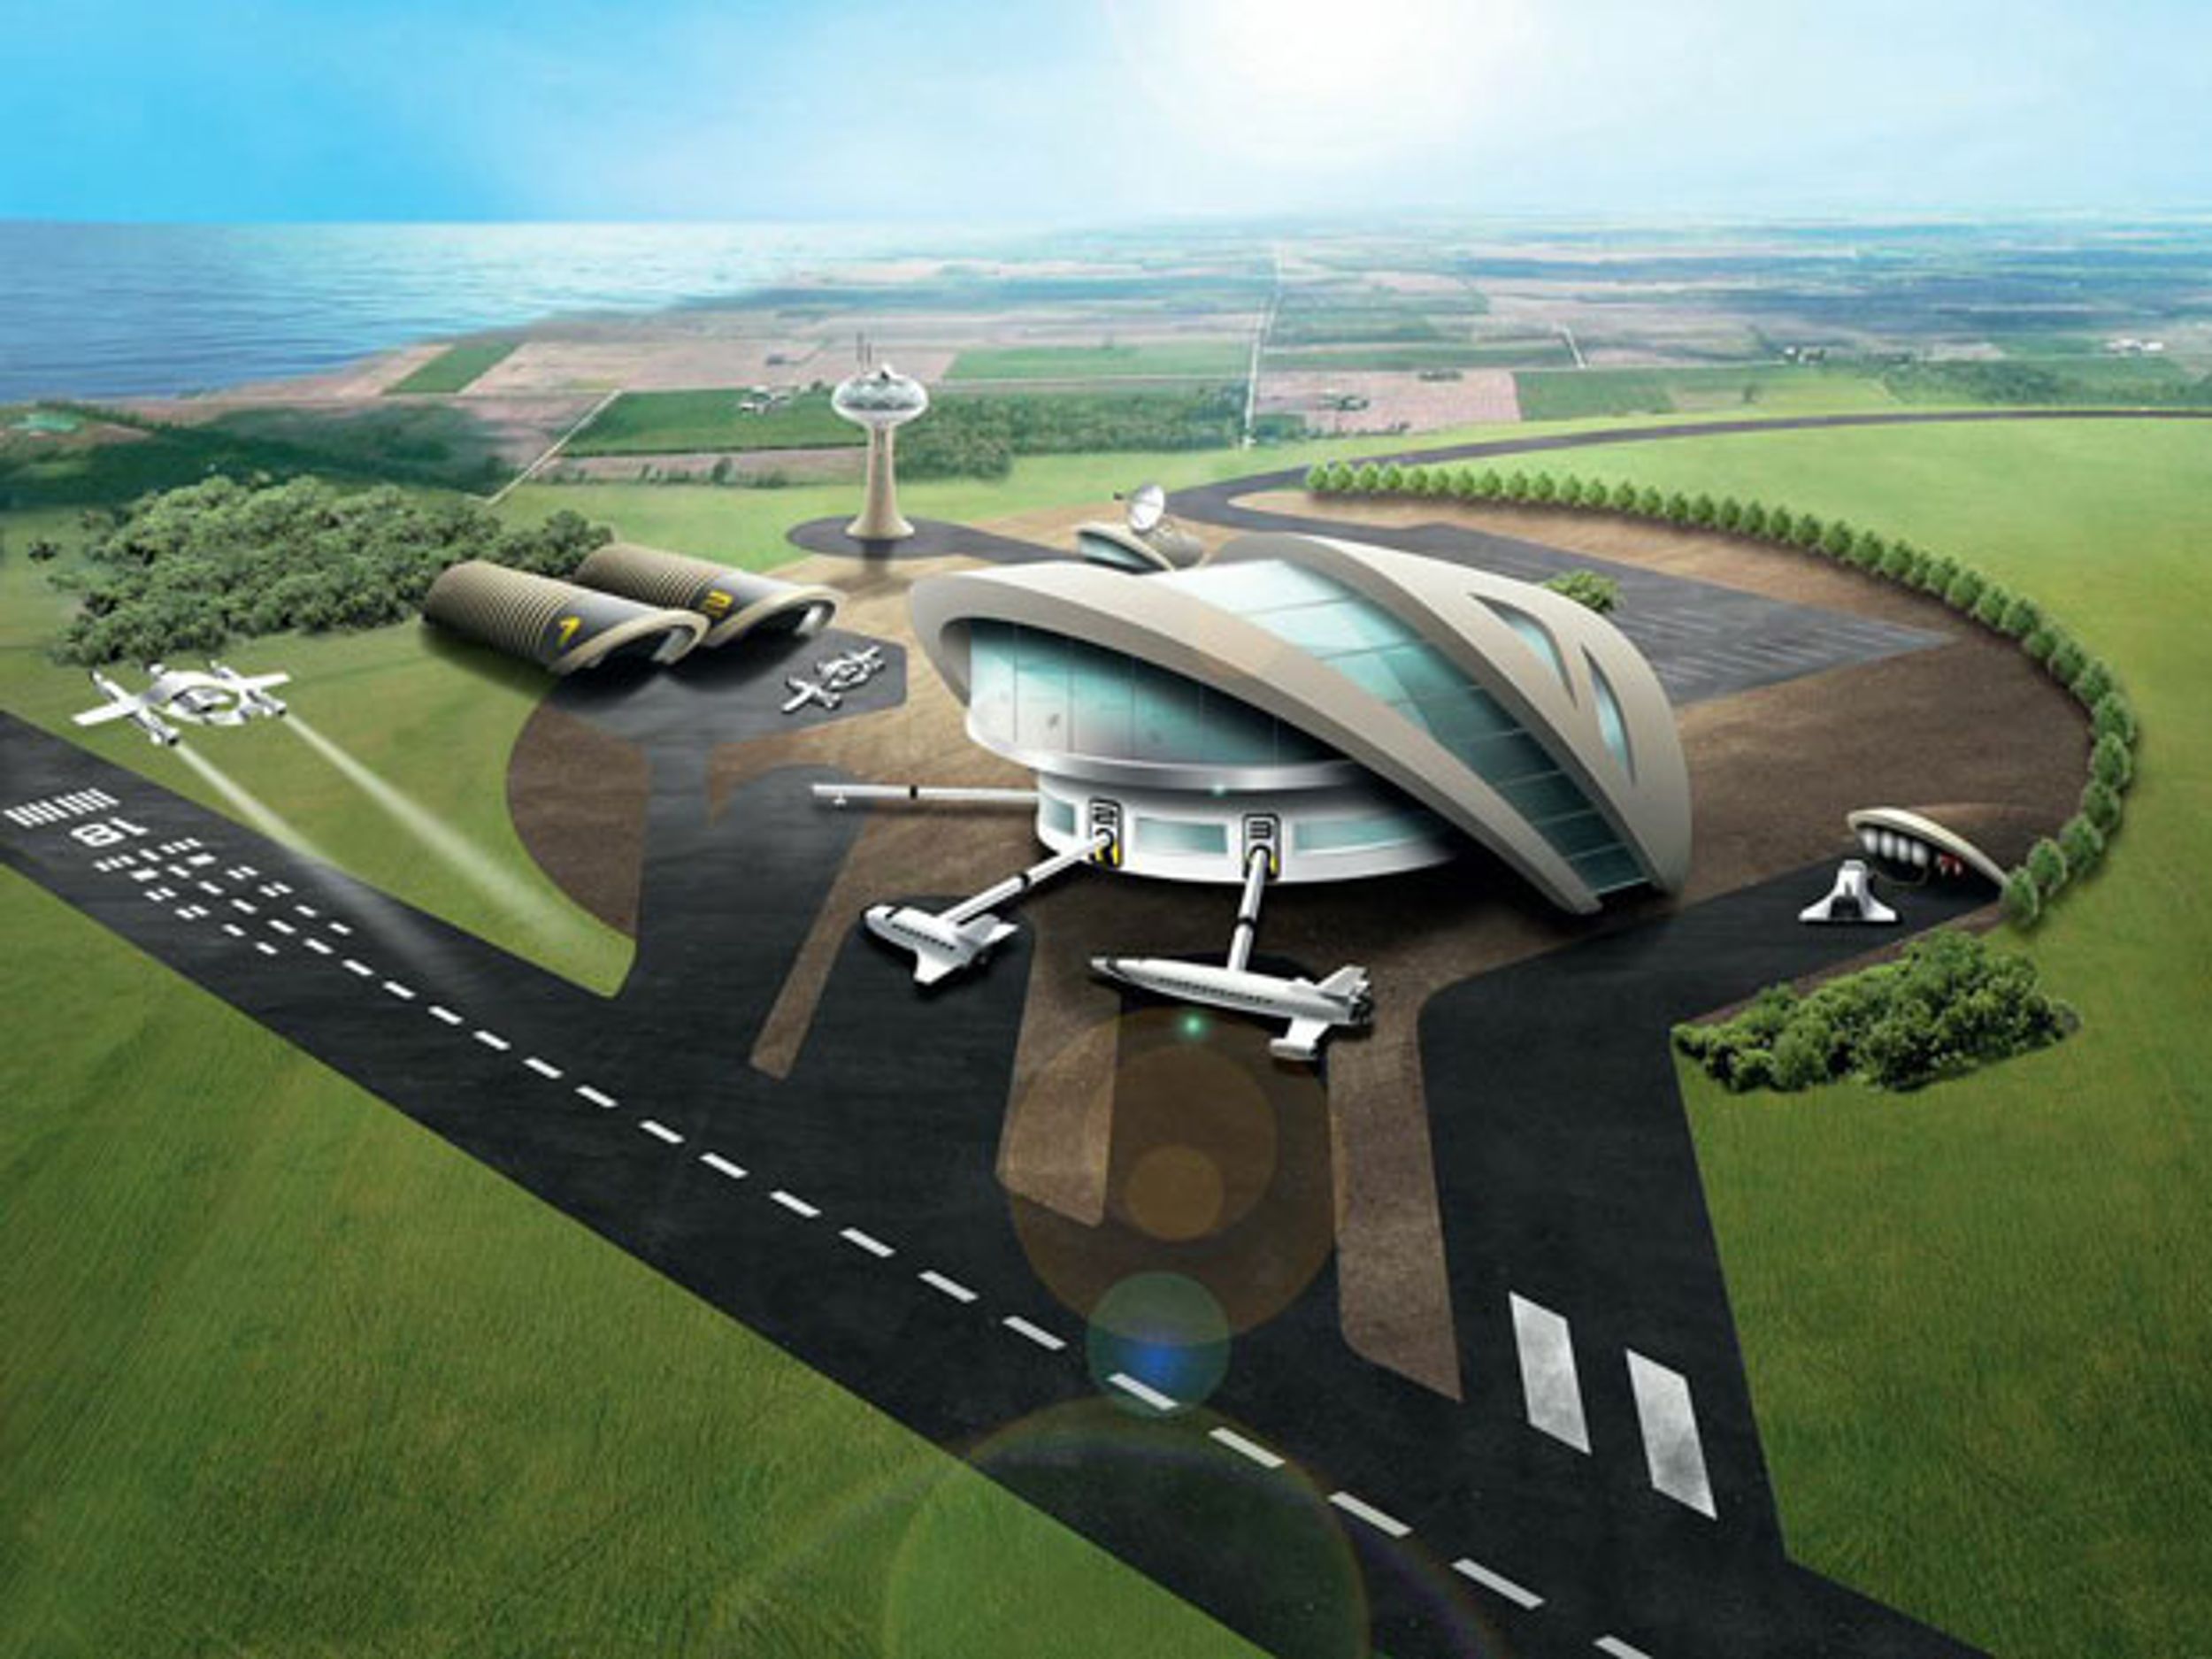 UK: Let's Make a Spaceport!